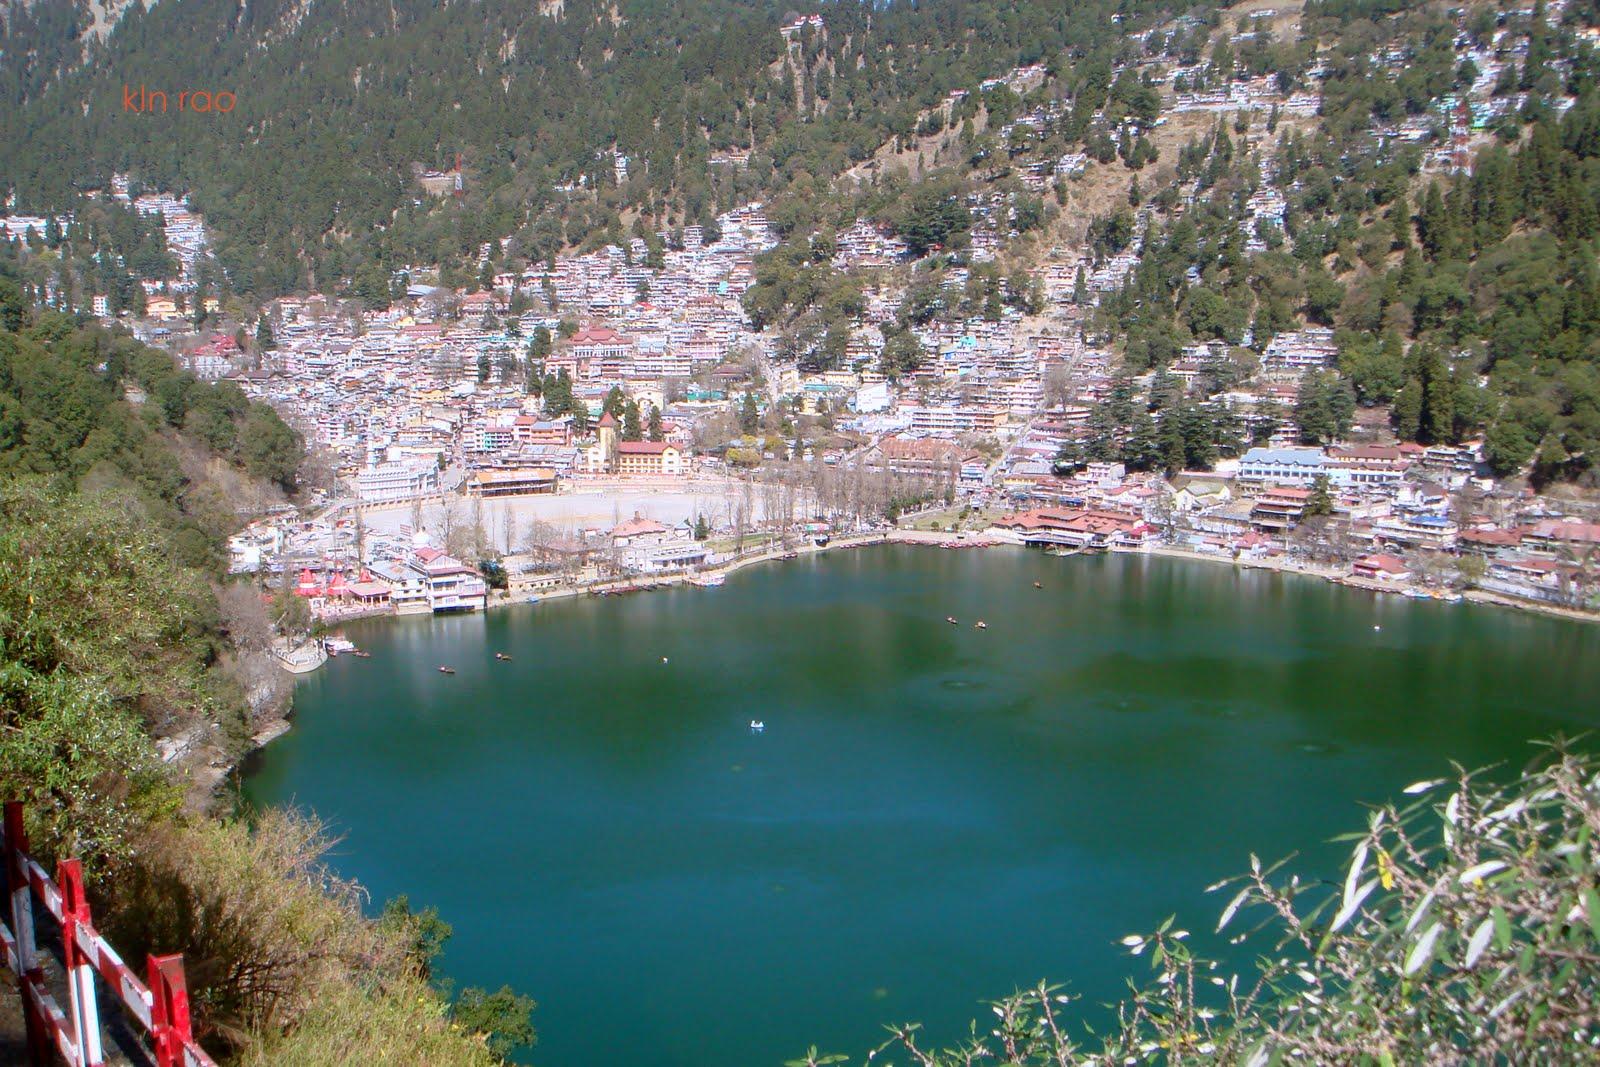 Nainital is a most popular hill station in the world, in India. It